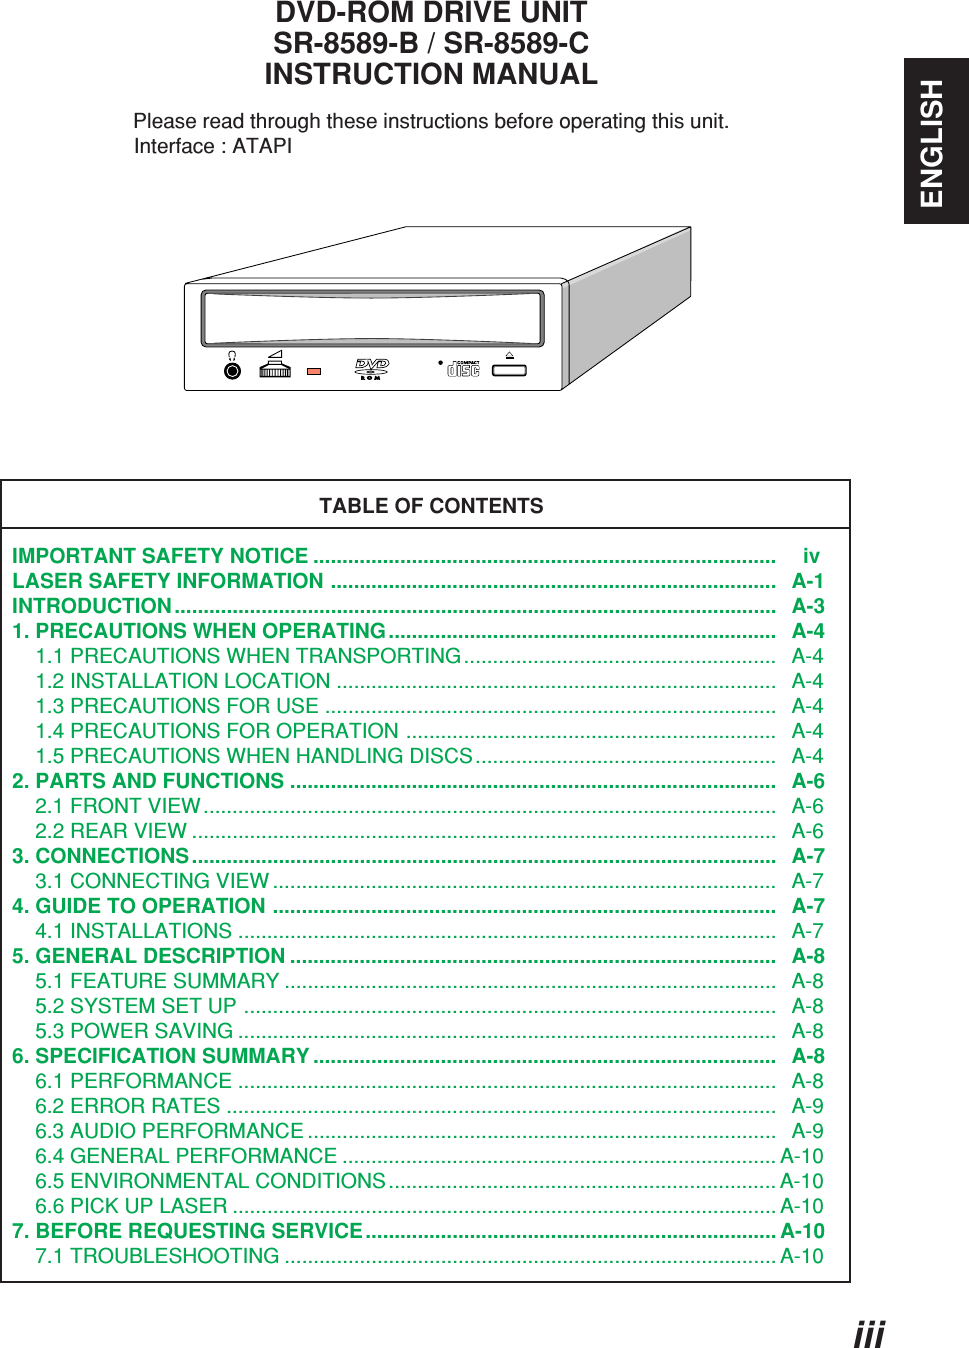 iiiENGLISHDVD-ROM DRIVE UNITSR-8589-B / SR-8589-CINSTRUCTION MANUALPlease read through these instructions before operating this unit.                     Interface : ATAPITABLE OF CONTENTSIMPORTANT SAFETY NOTICE ................................................................................     ivLASER SAFETY INFORMATION .............................................................................   A-1INTRODUCTION ........................................................................................................   A-31. PRECAUTIONS WHEN OPERATING ...................................................................   A-4    1.1 PRECAUTIONS WHEN TRANSPORTING......................................................   A-4    1.2 INSTALLATION LOCATION ............................................................................   A-4    1.3 PRECAUTIONS FOR USE ..............................................................................   A-4    1.4 PRECAUTIONS FOR OPERATION ................................................................   A-4    1.5 PRECAUTIONS WHEN HANDLING DISCS....................................................   A-42. PARTS AND FUNCTIONS ....................................................................................   A-6    2.1 FRONT VIEW...................................................................................................   A-6    2.2 REAR VIEW .....................................................................................................   A-63. CONNECTIONS .....................................................................................................   A-7    3.1 CONNECTING VIEW .......................................................................................   A-74. GUIDE TO OPERATION .......................................................................................   A-7    4.1 INSTALLATIONS .............................................................................................   A-75. GENERAL DESCRIPTION ....................................................................................   A-8    5.1 FEATURE SUMMARY .....................................................................................   A-8    5.2 SYSTEM SET UP ............................................................................................   A-8    5.3 POWER SAVING .............................................................................................   A-86. SPECIFICATION SUMMARY ................................................................................   A-8    6.1 PERFORMANCE .............................................................................................   A-8    6.2 ERROR RATES ...............................................................................................   A-9    6.3 AUDIO PERFORMANCE .................................................................................   A-9    6.4 GENERAL PERFORMANCE ........................................................................... A-10    6.5 ENVIRONMENTAL CONDITIONS................................................................... A-10    6.6 PICK UP LASER .............................................................................................. A-107. BEFORE REQUESTING SERVICE ....................................................................... A-10    7.1 TROUBLESHOOTING ..................................................................................... A-10